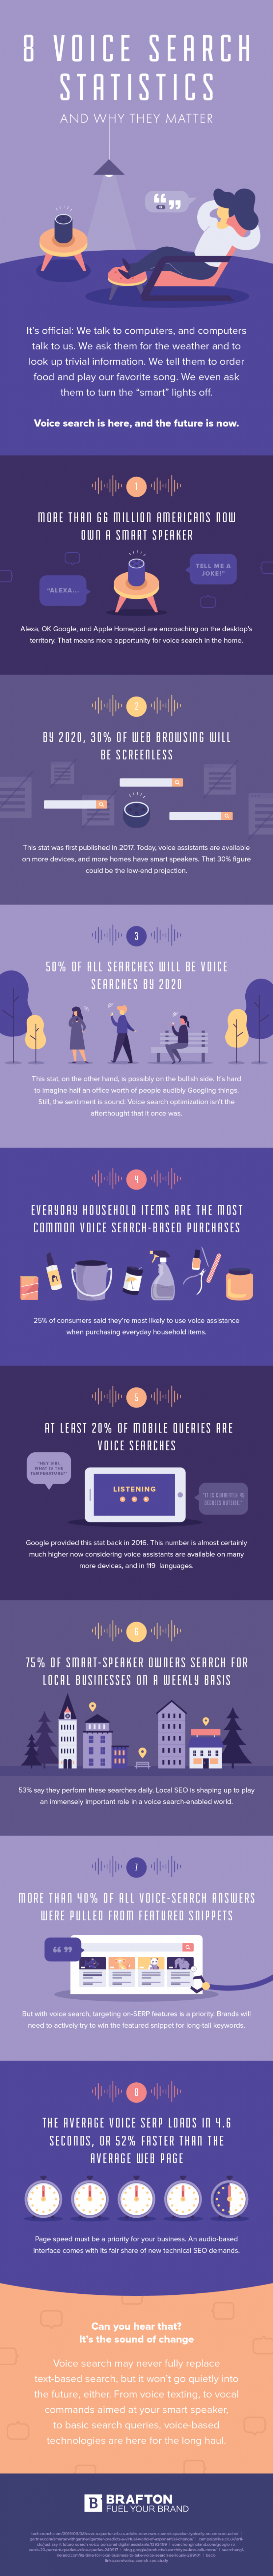 8 voice search stats and why they matter infographic